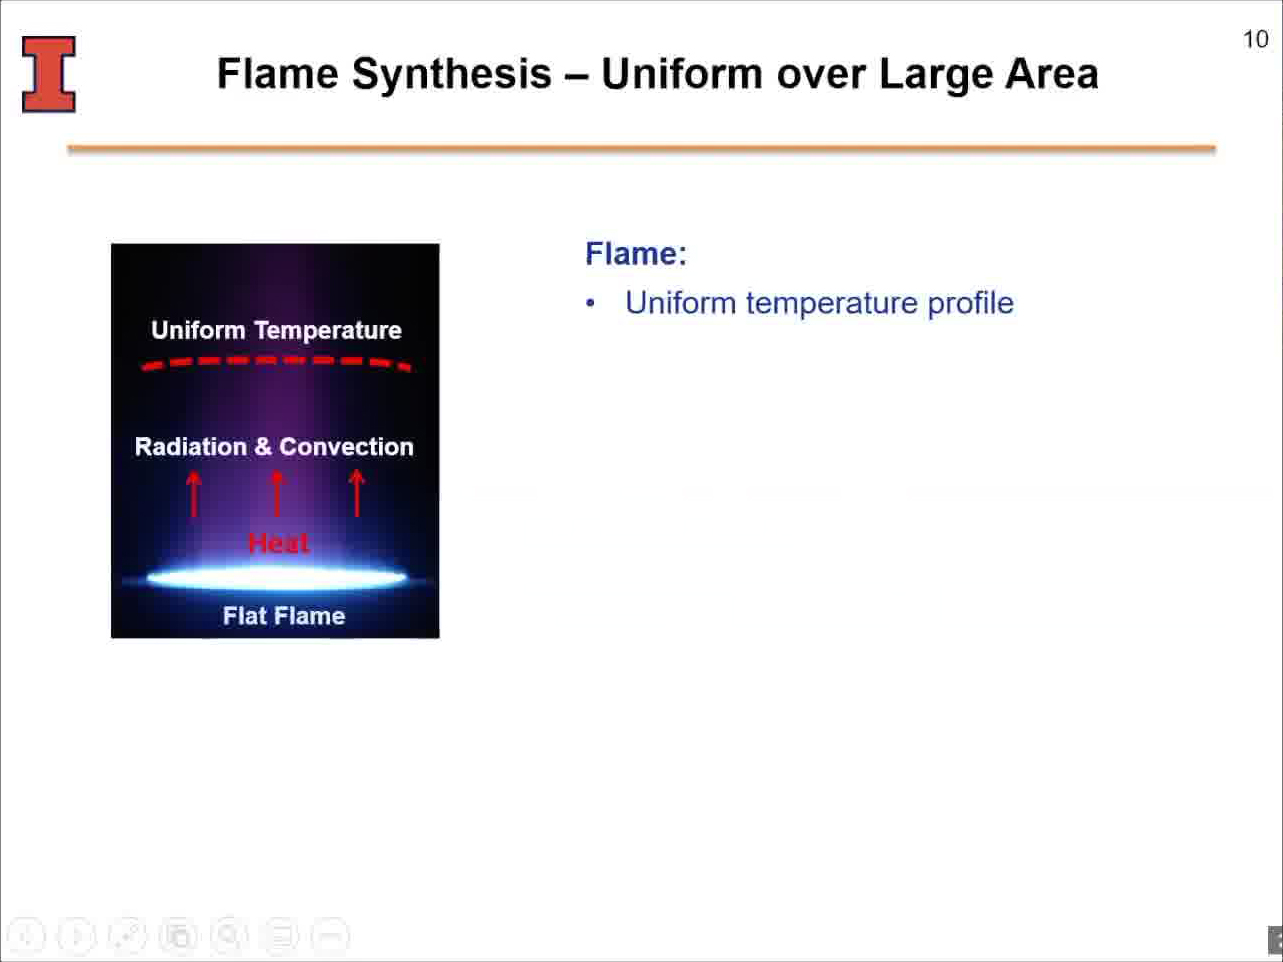 Flame Synthesis – Uniform over Large Area